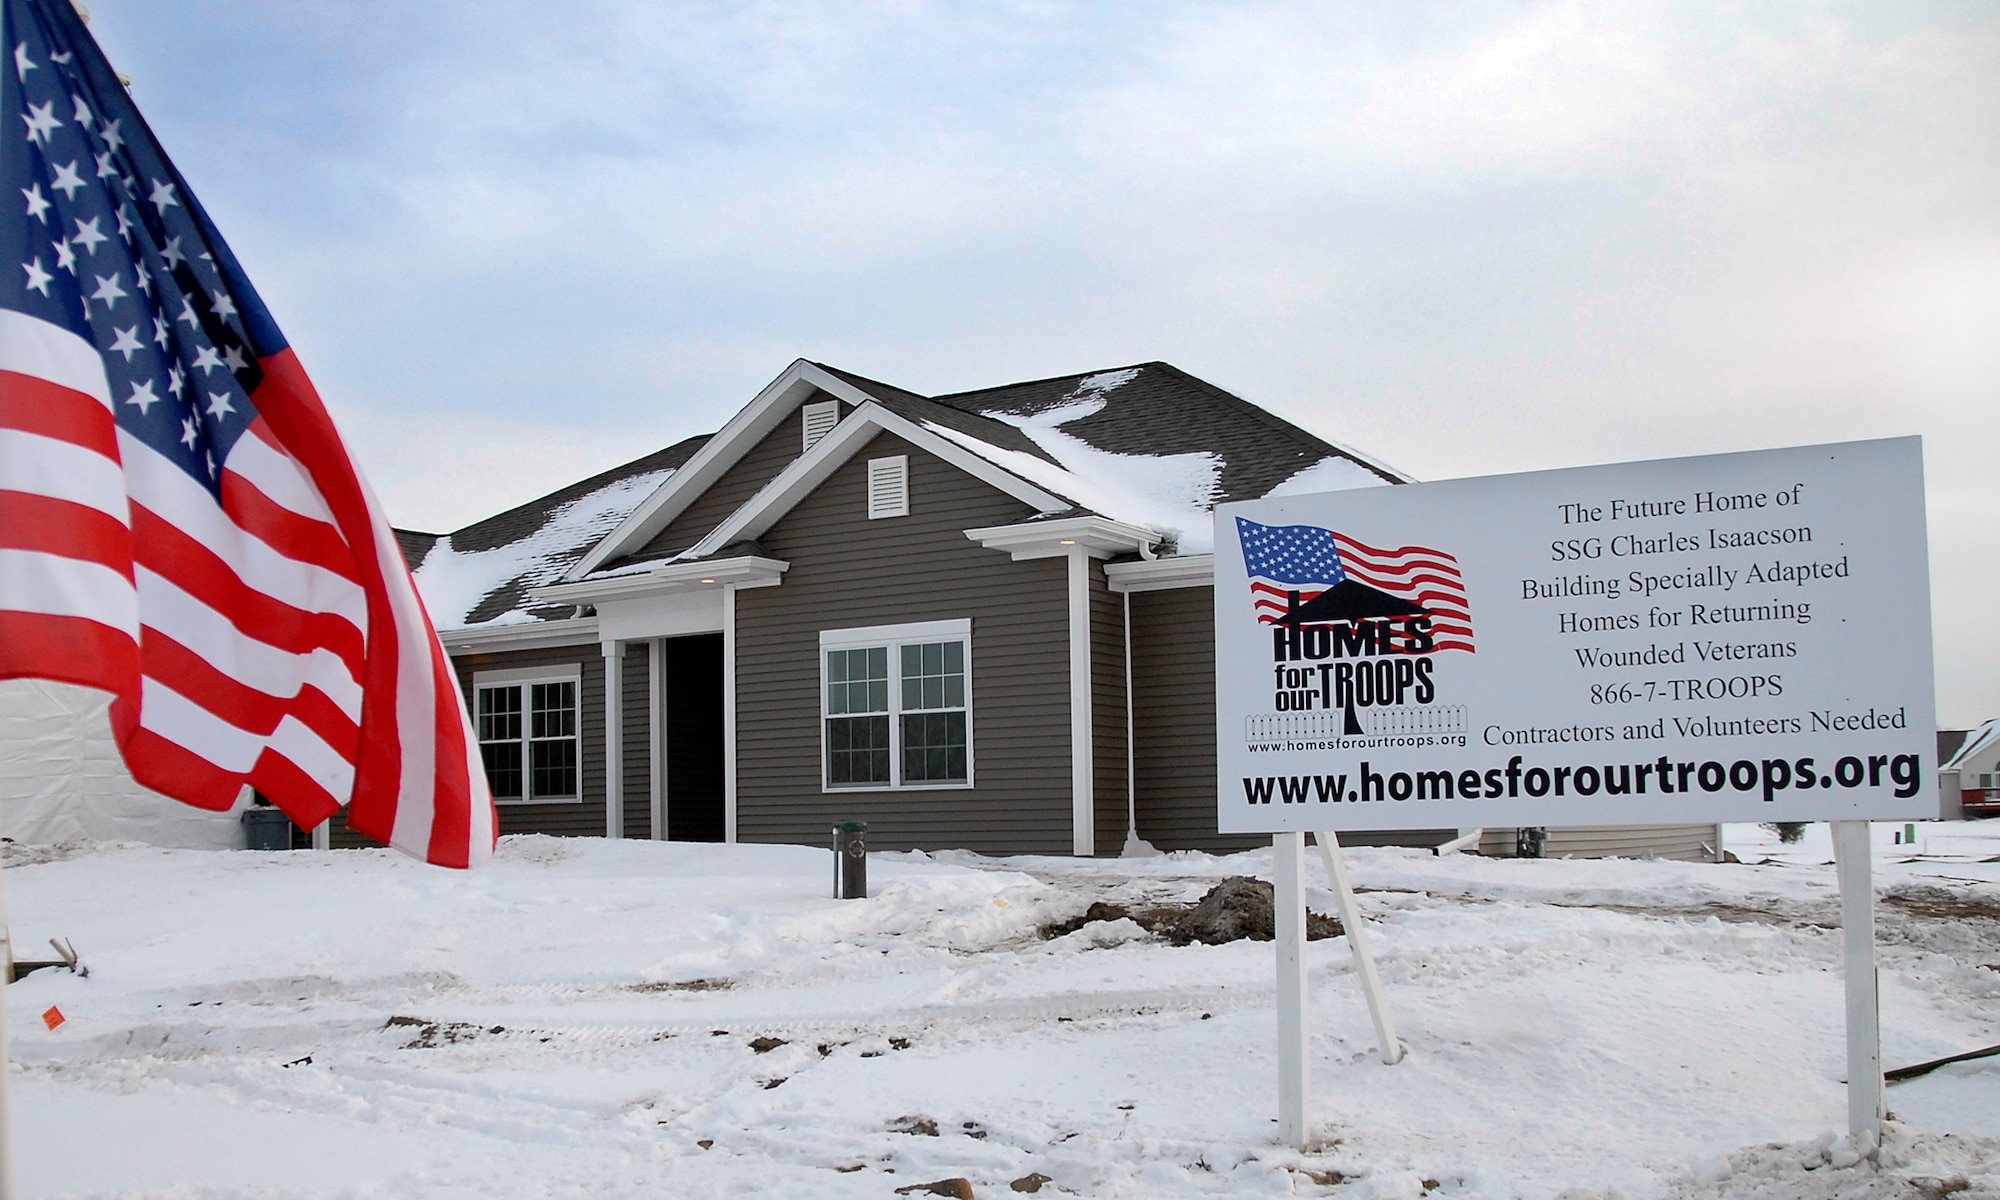 More than 10 Airmen from the 115th Fighter Wing contributed to this newly built home, located in Sun Prairie, for injured Army veteran Staff Sgt. Charles Isaacson and his wife, Brenda, through the Homes for Our Troops Program. The home features many of the special accomodations that Sergeant Isaacson needs to accomodate his injuries from the War on Terror. (U.S. Air Force Photo by Master Sgt. Dan Richardson)